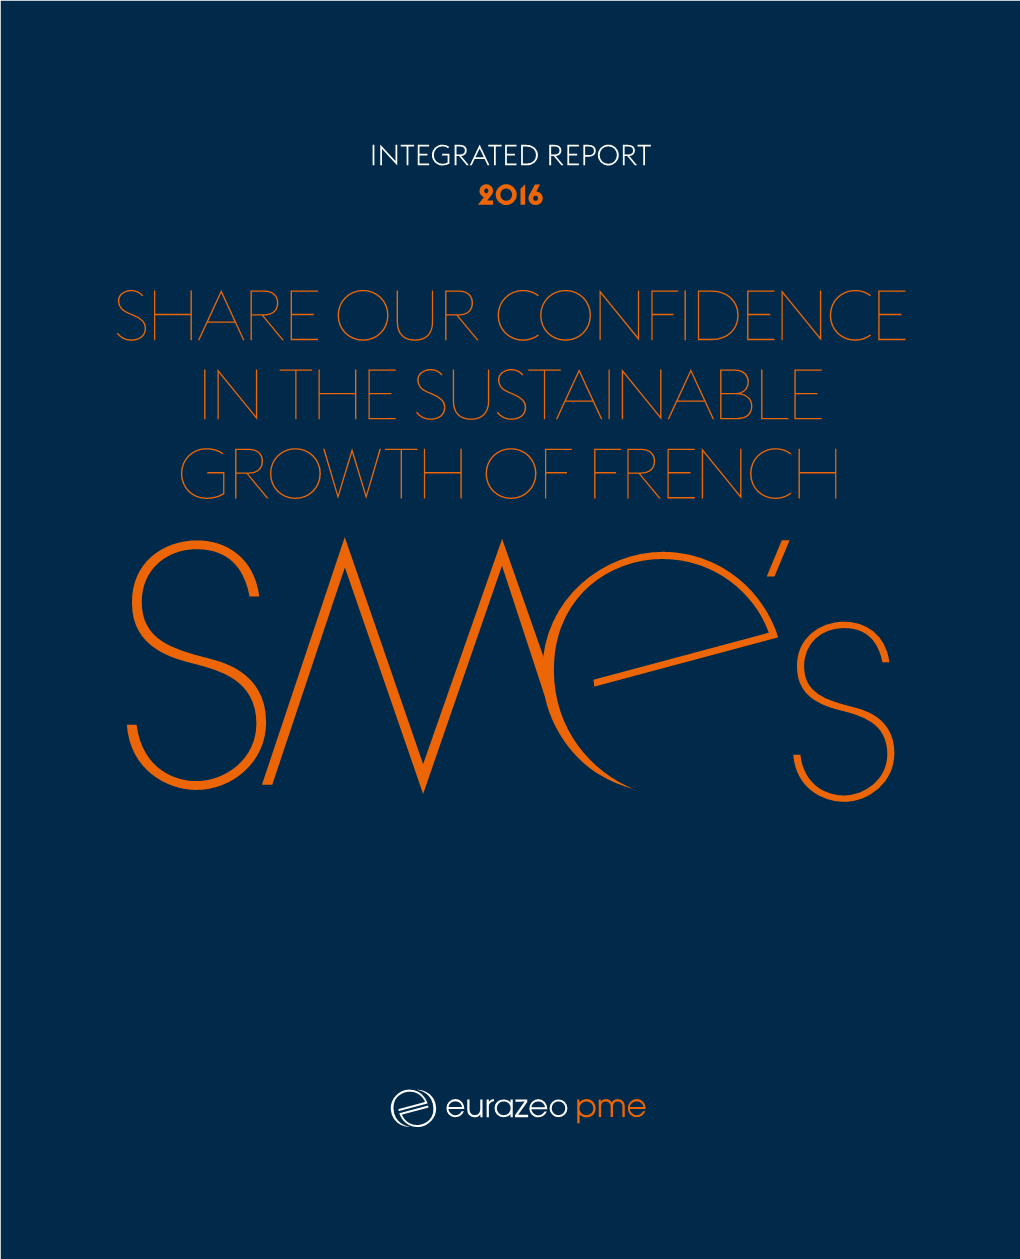 Share Our Confidence in the Sustainable Growth of French